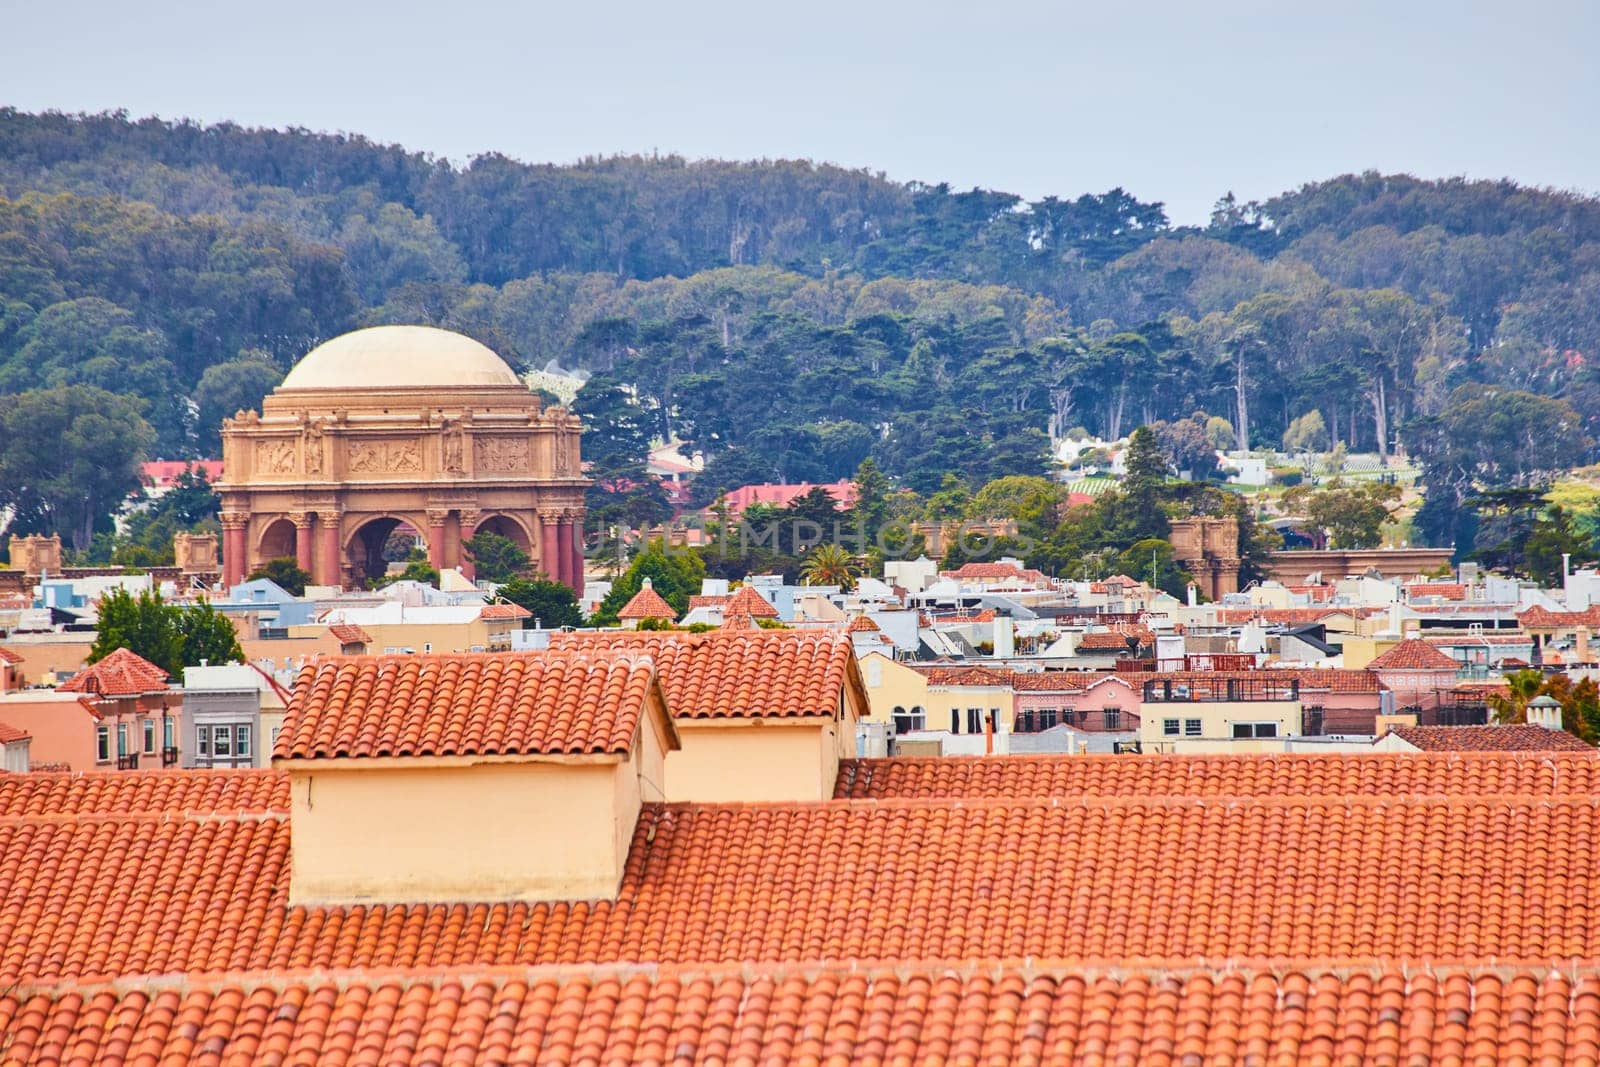 Image of Orange rooftop tiles overlooking buildings leading to Palace of Fine Arts Roman architecture